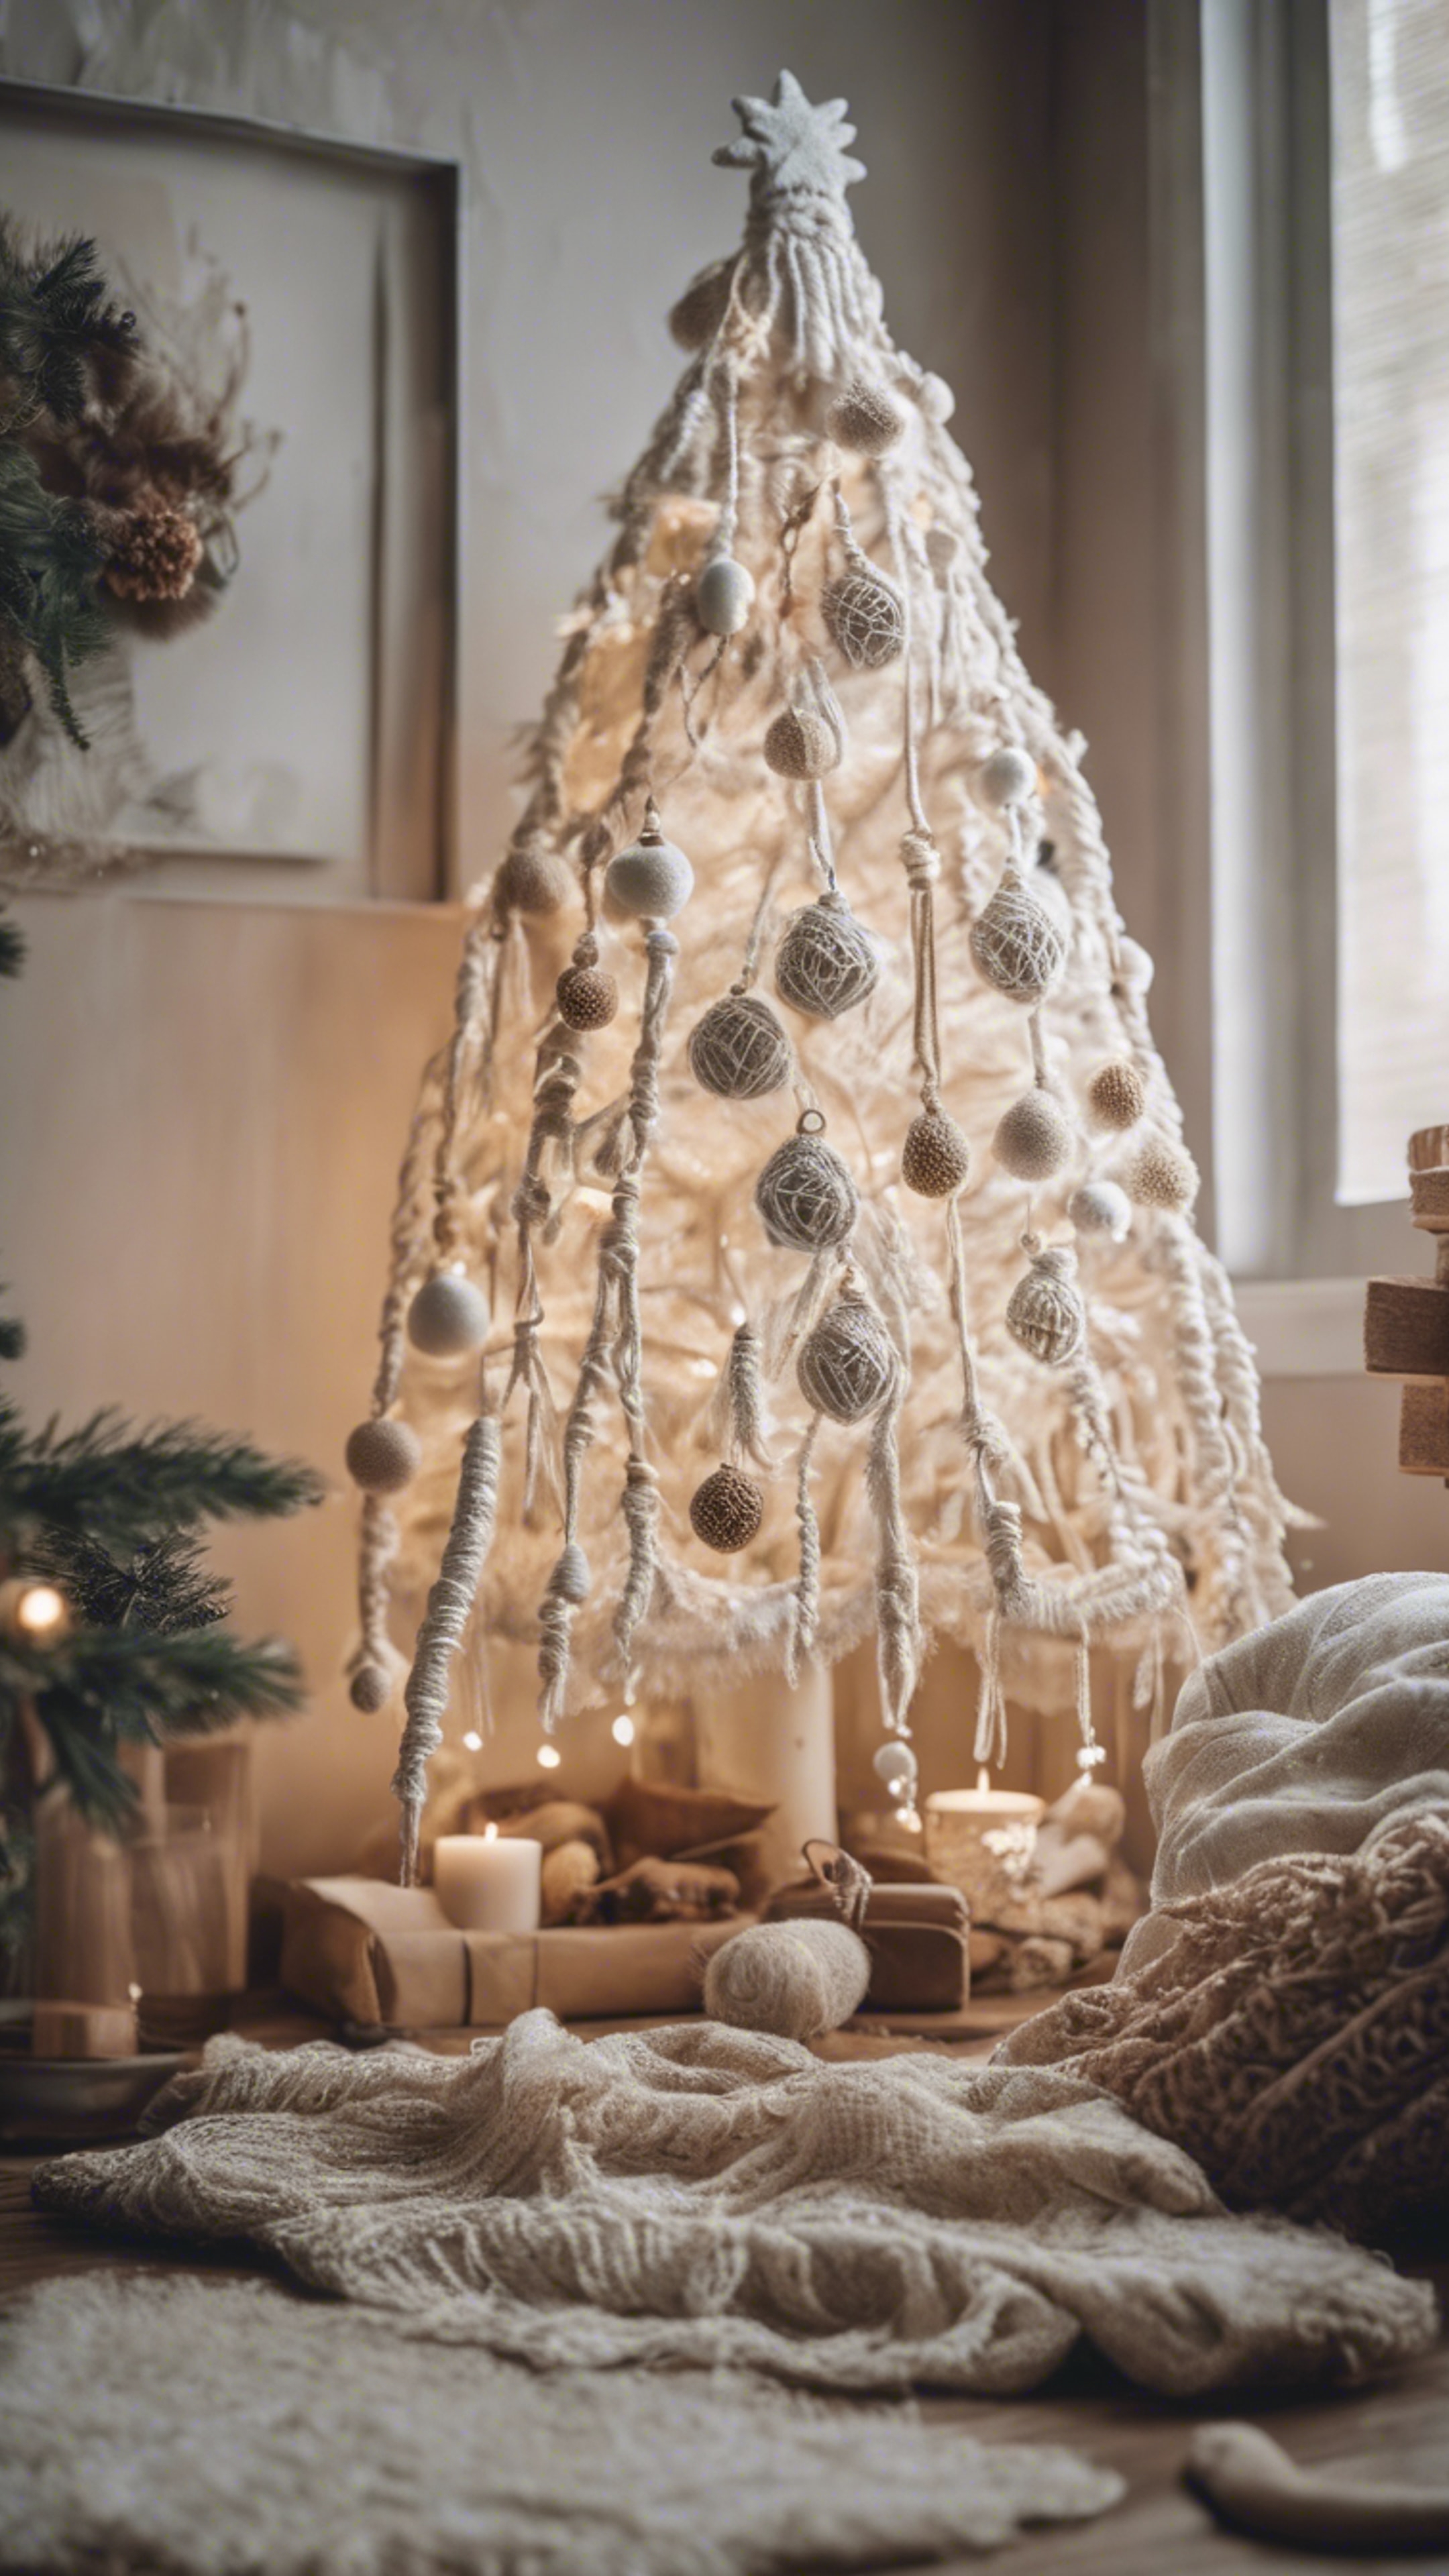 A white Christmas tree adorned with handmade macrame decorations in a boho-inspired room. Ταπετσαρία[c062b7b22ca84faf9af8]